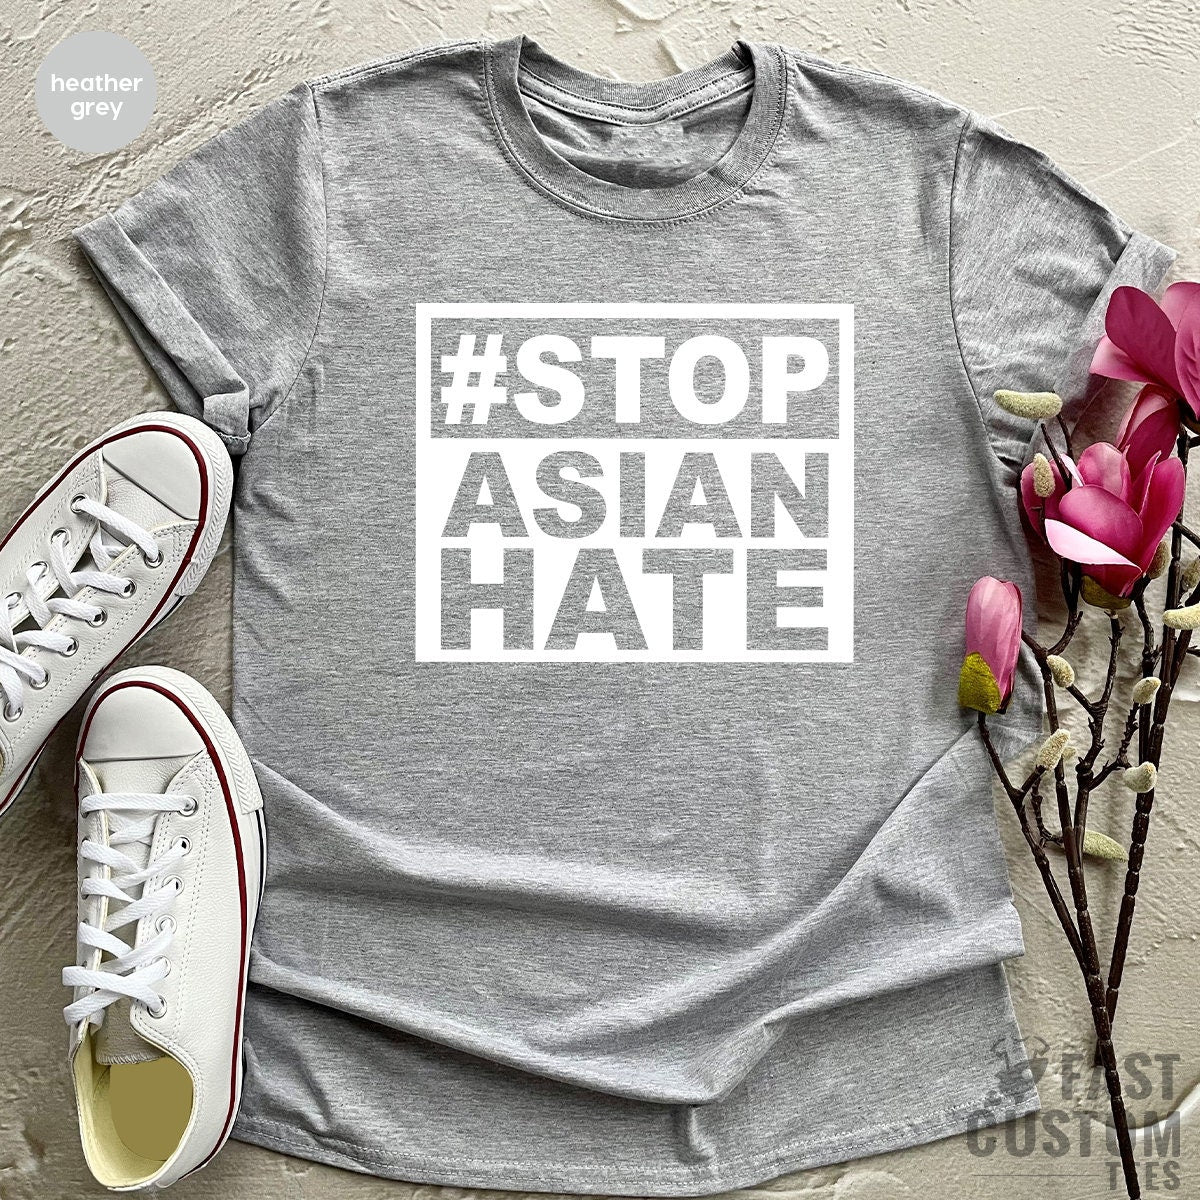 Stop Asian Hate Shirt, Hate Is A Virus, Asian Discrimination T Shirt, Stop Asian American Hate Tee, Stop Racism TShirt, AAPI Support Shirt - Fastdeliverytees.com